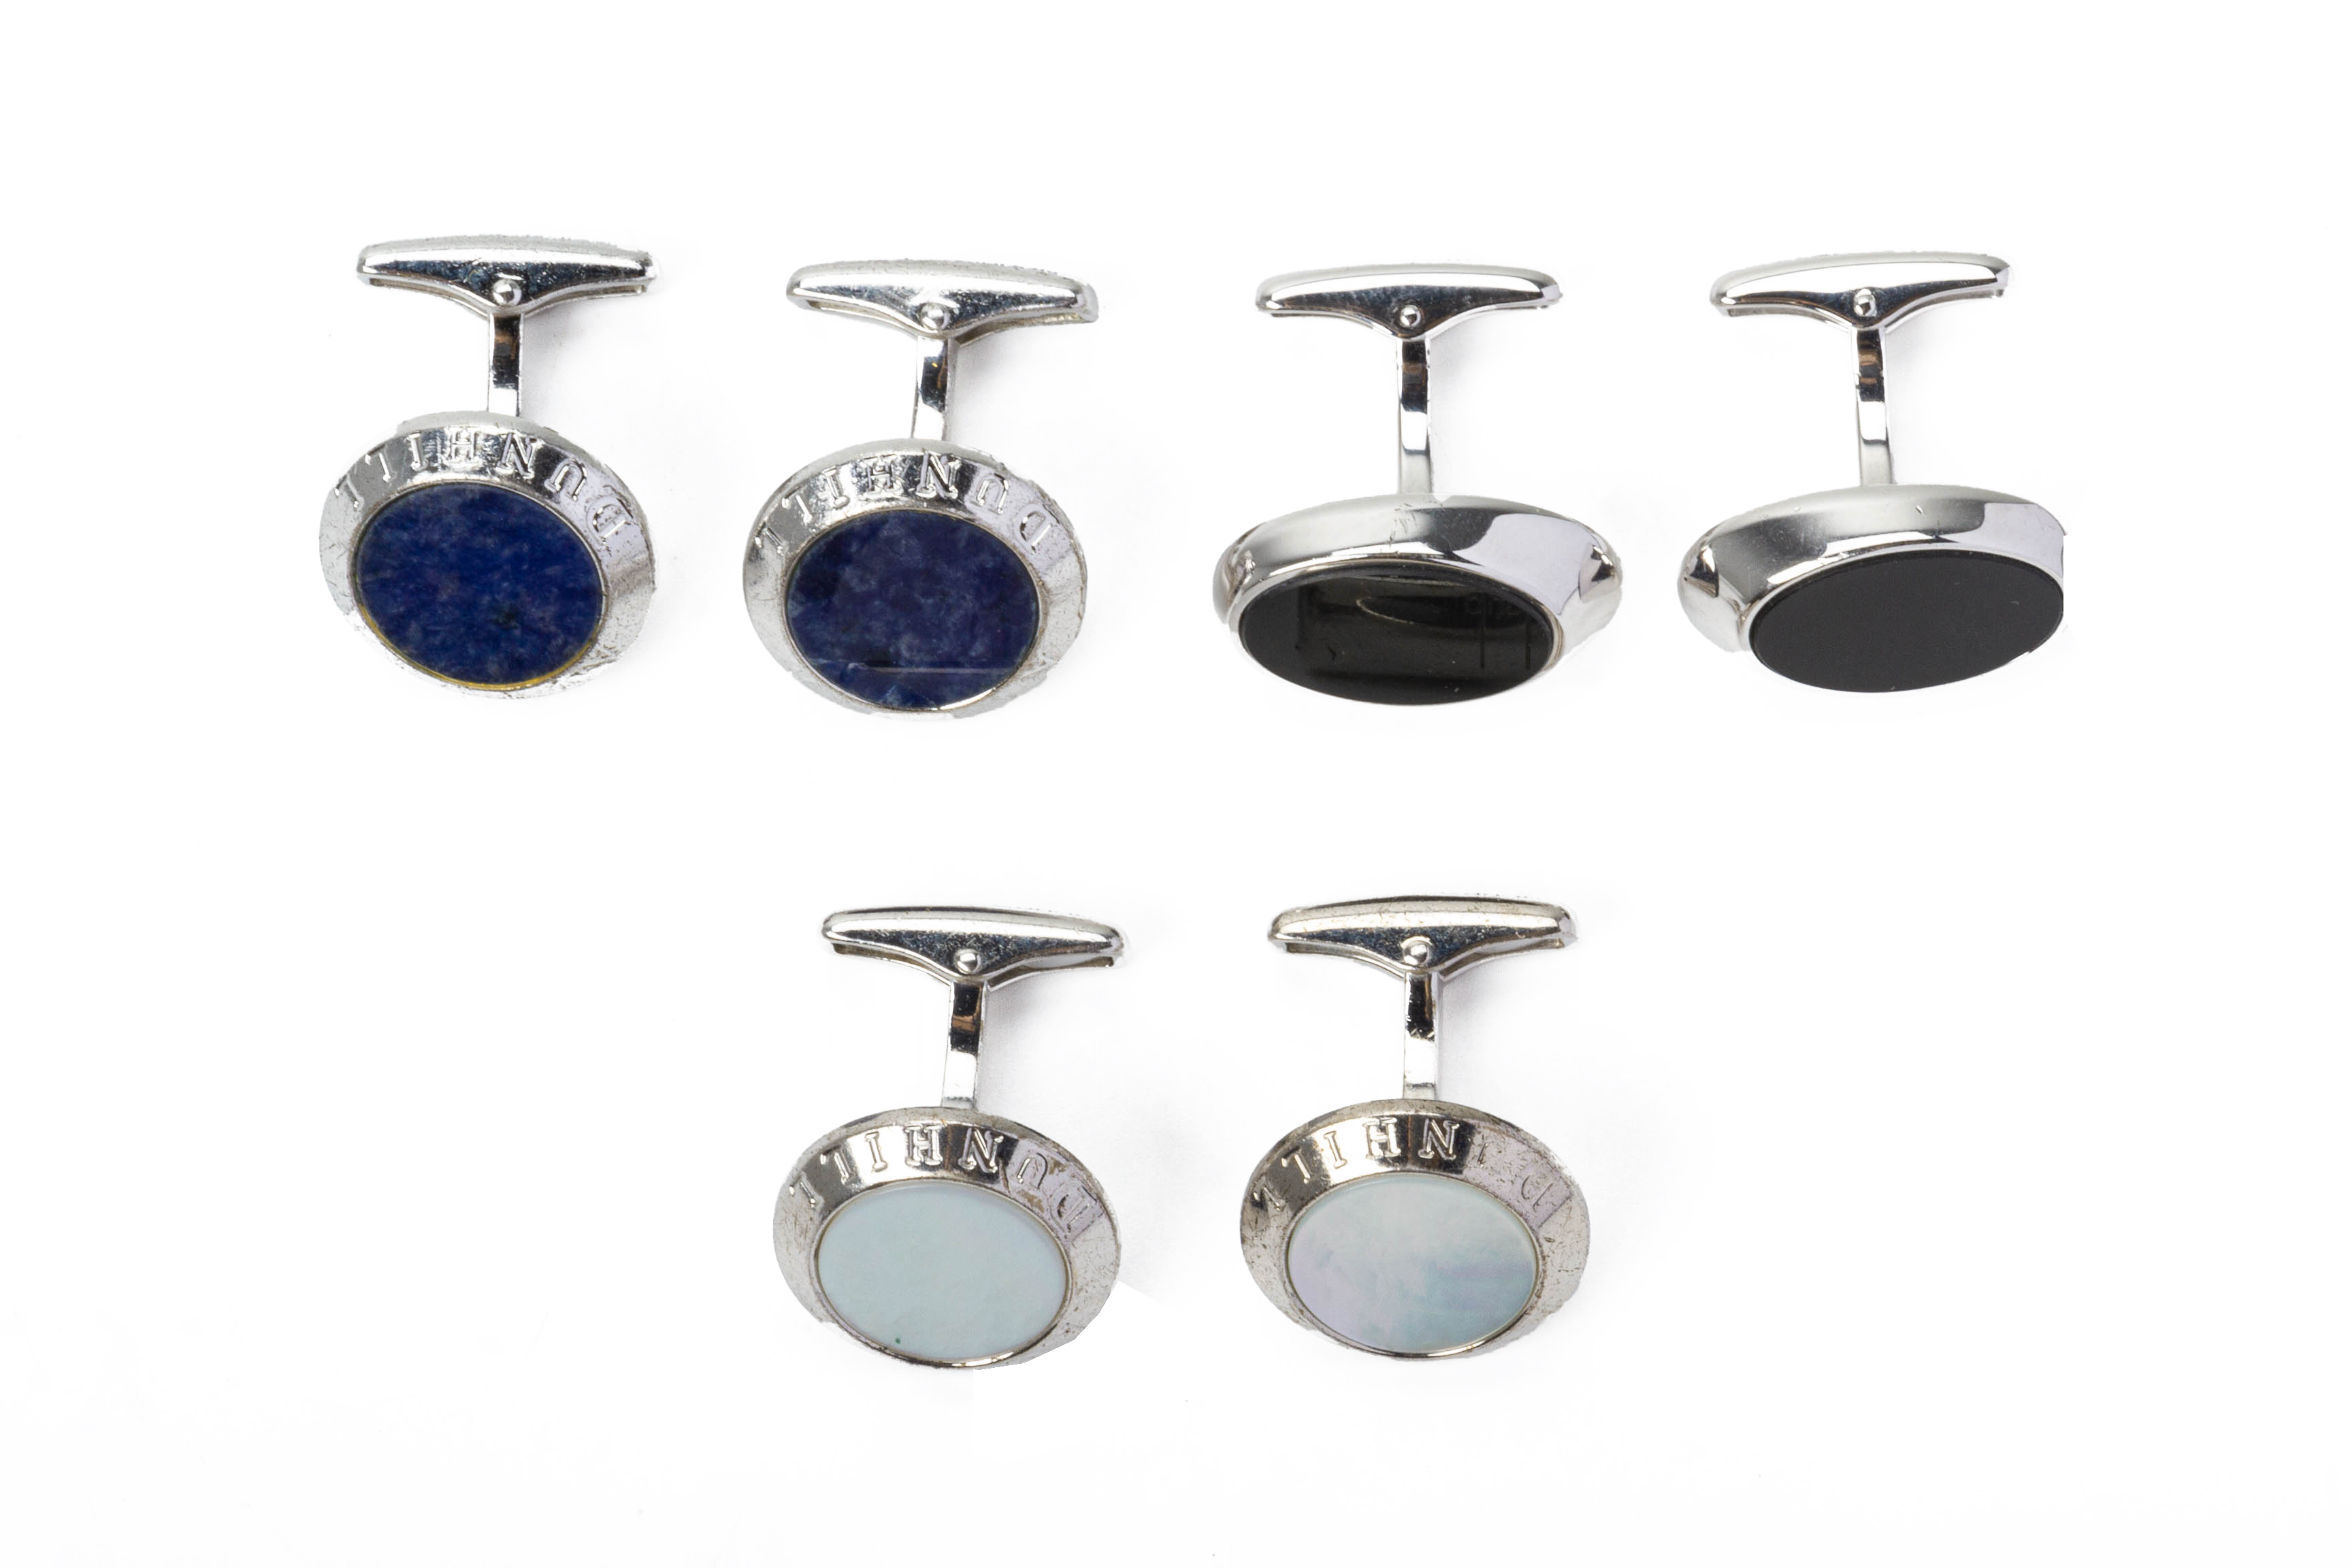 THREE PAIRS OF DUNHILL SILVER CUFFLINKS - Image 2 of 2